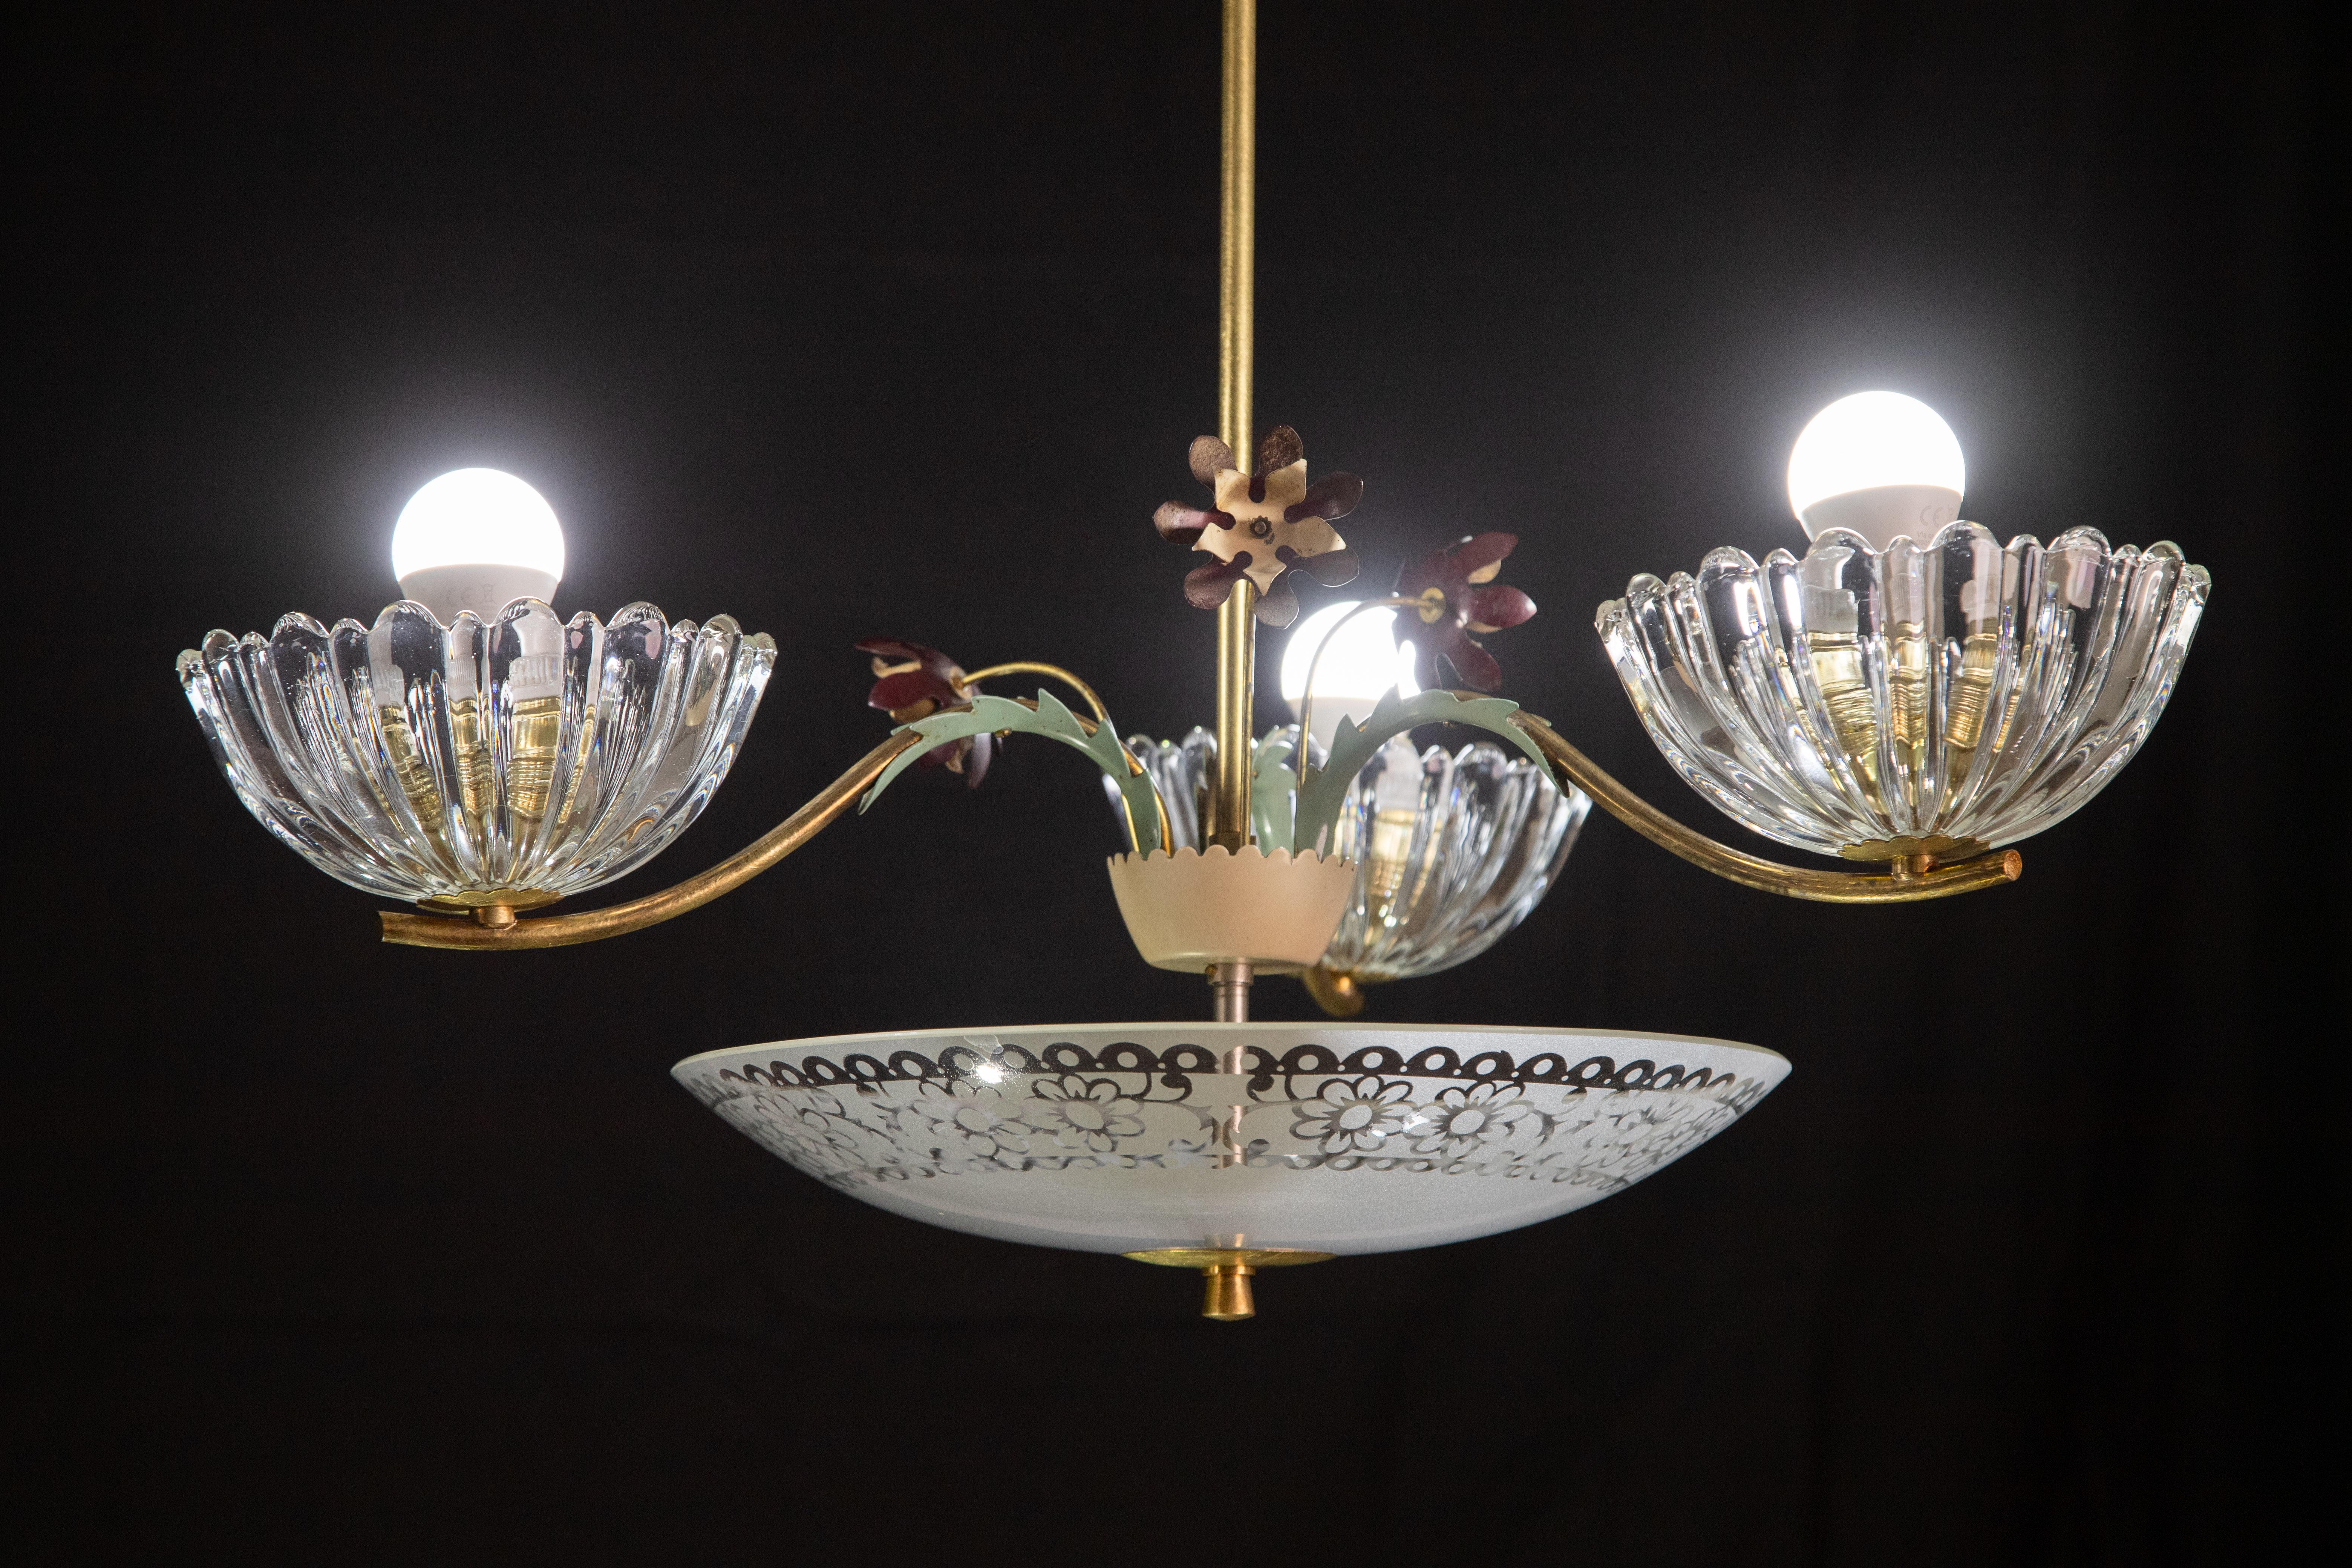 Gorgeous 1950s deco-era chandelier made of Murano glass and brass.

The chandelier consists of three glass bowls and a glass disk below, a brass frame decorated with three brass flowers.

It mounts three e27 lights.